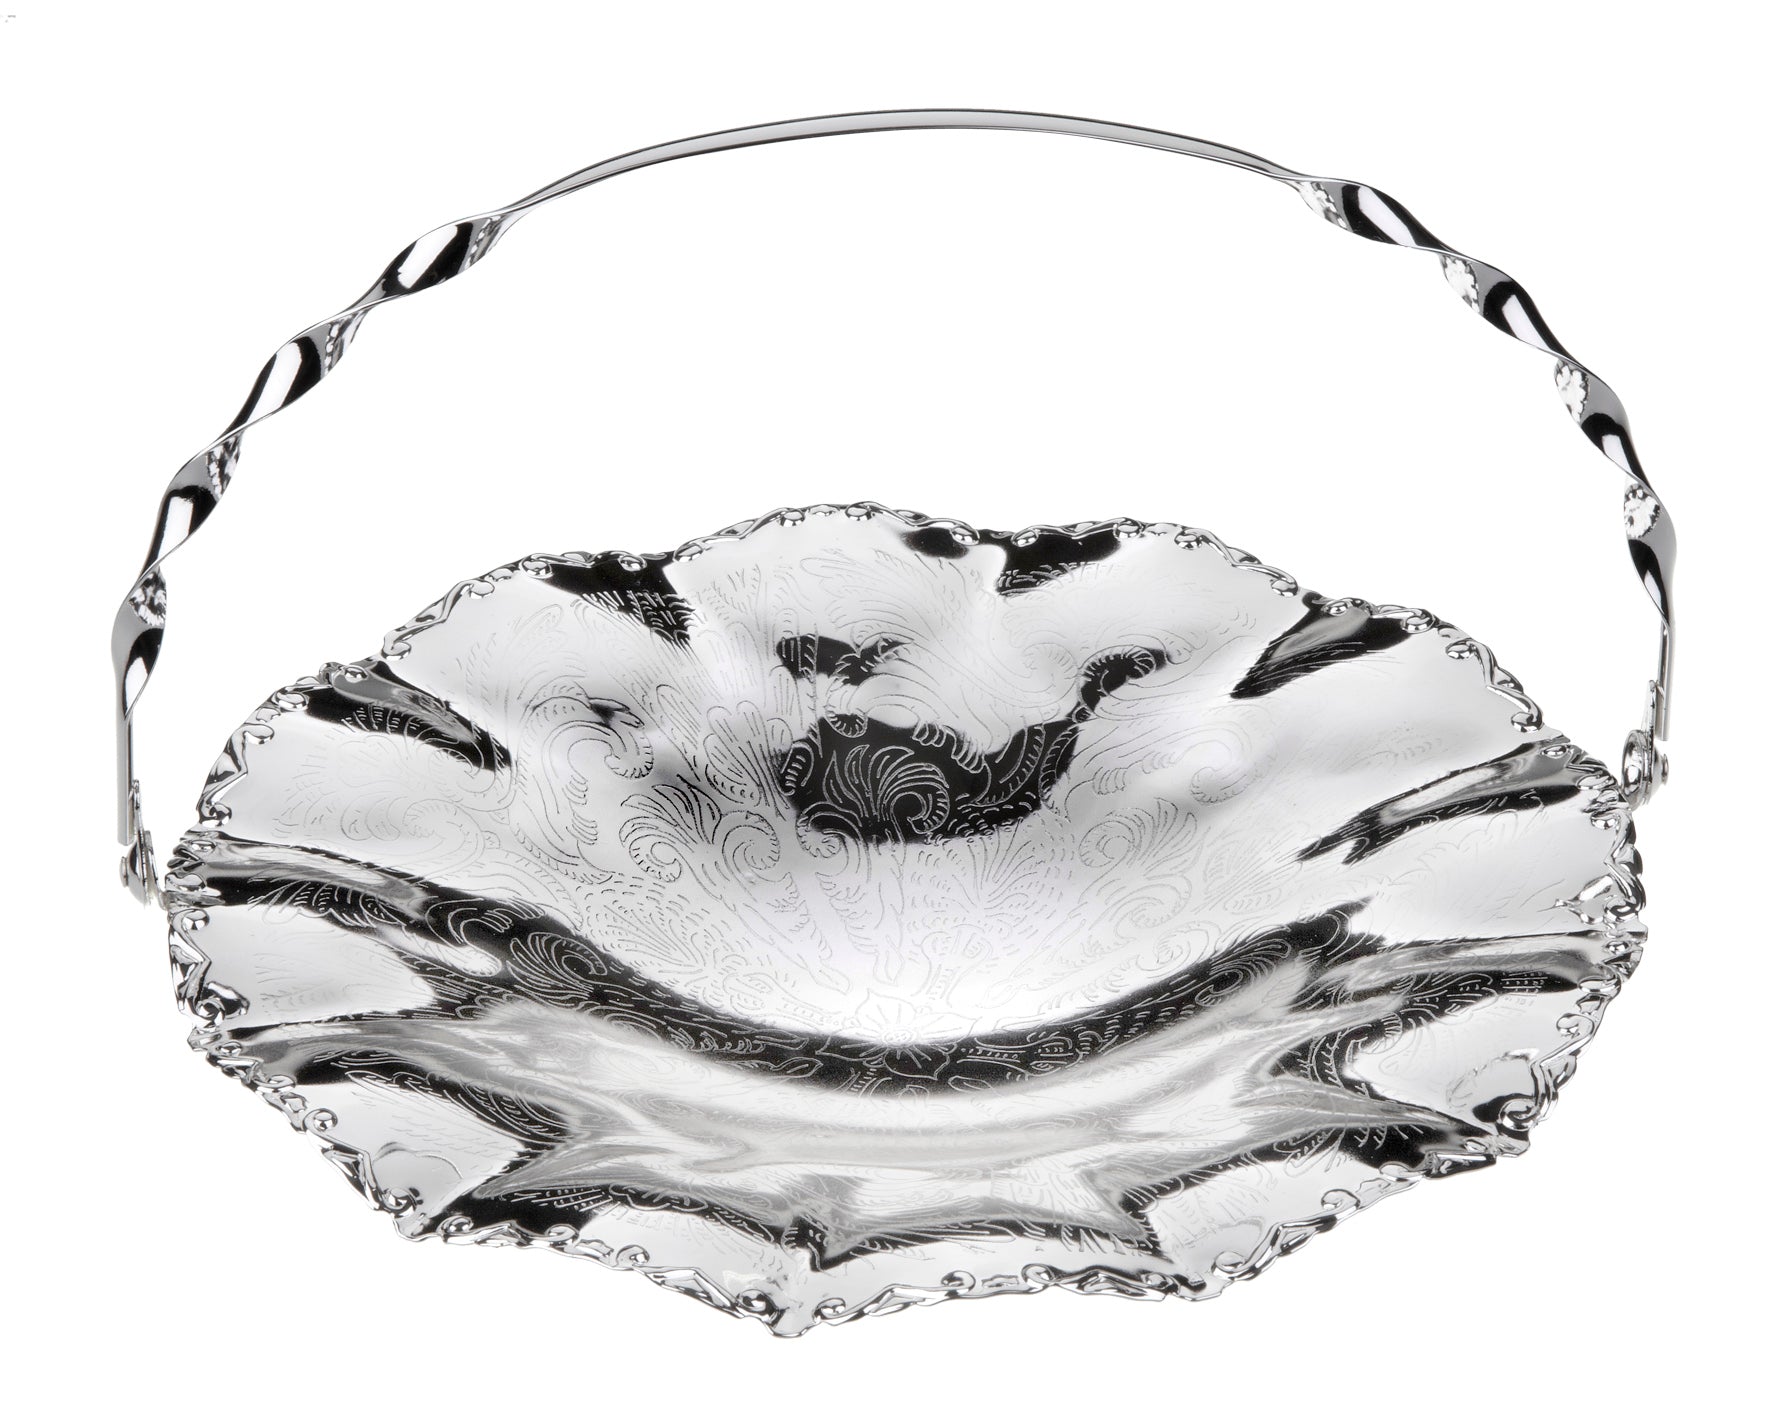 Queen Anne Wavy Edge Plate with Swing Handle & Base -23cm -Silver Plated